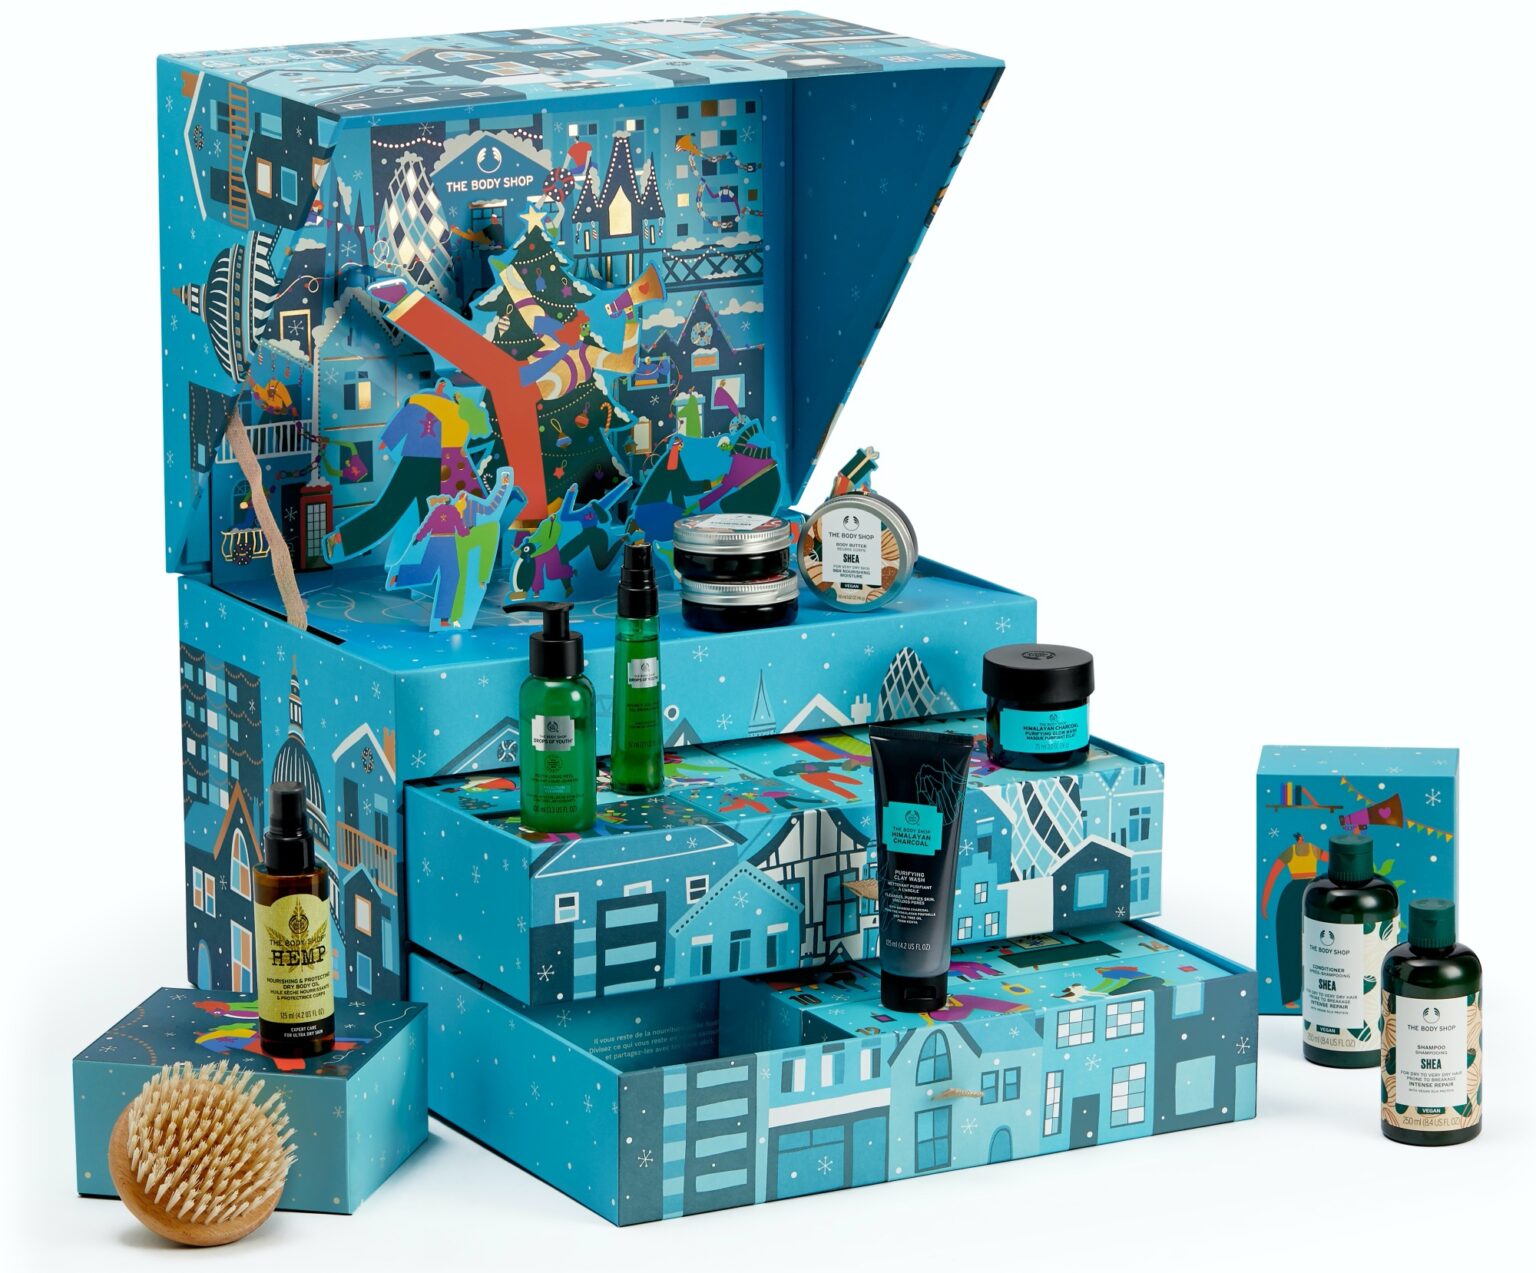 the-body-shop-exclusive-limited-edition-advent-calendar-2021-contents